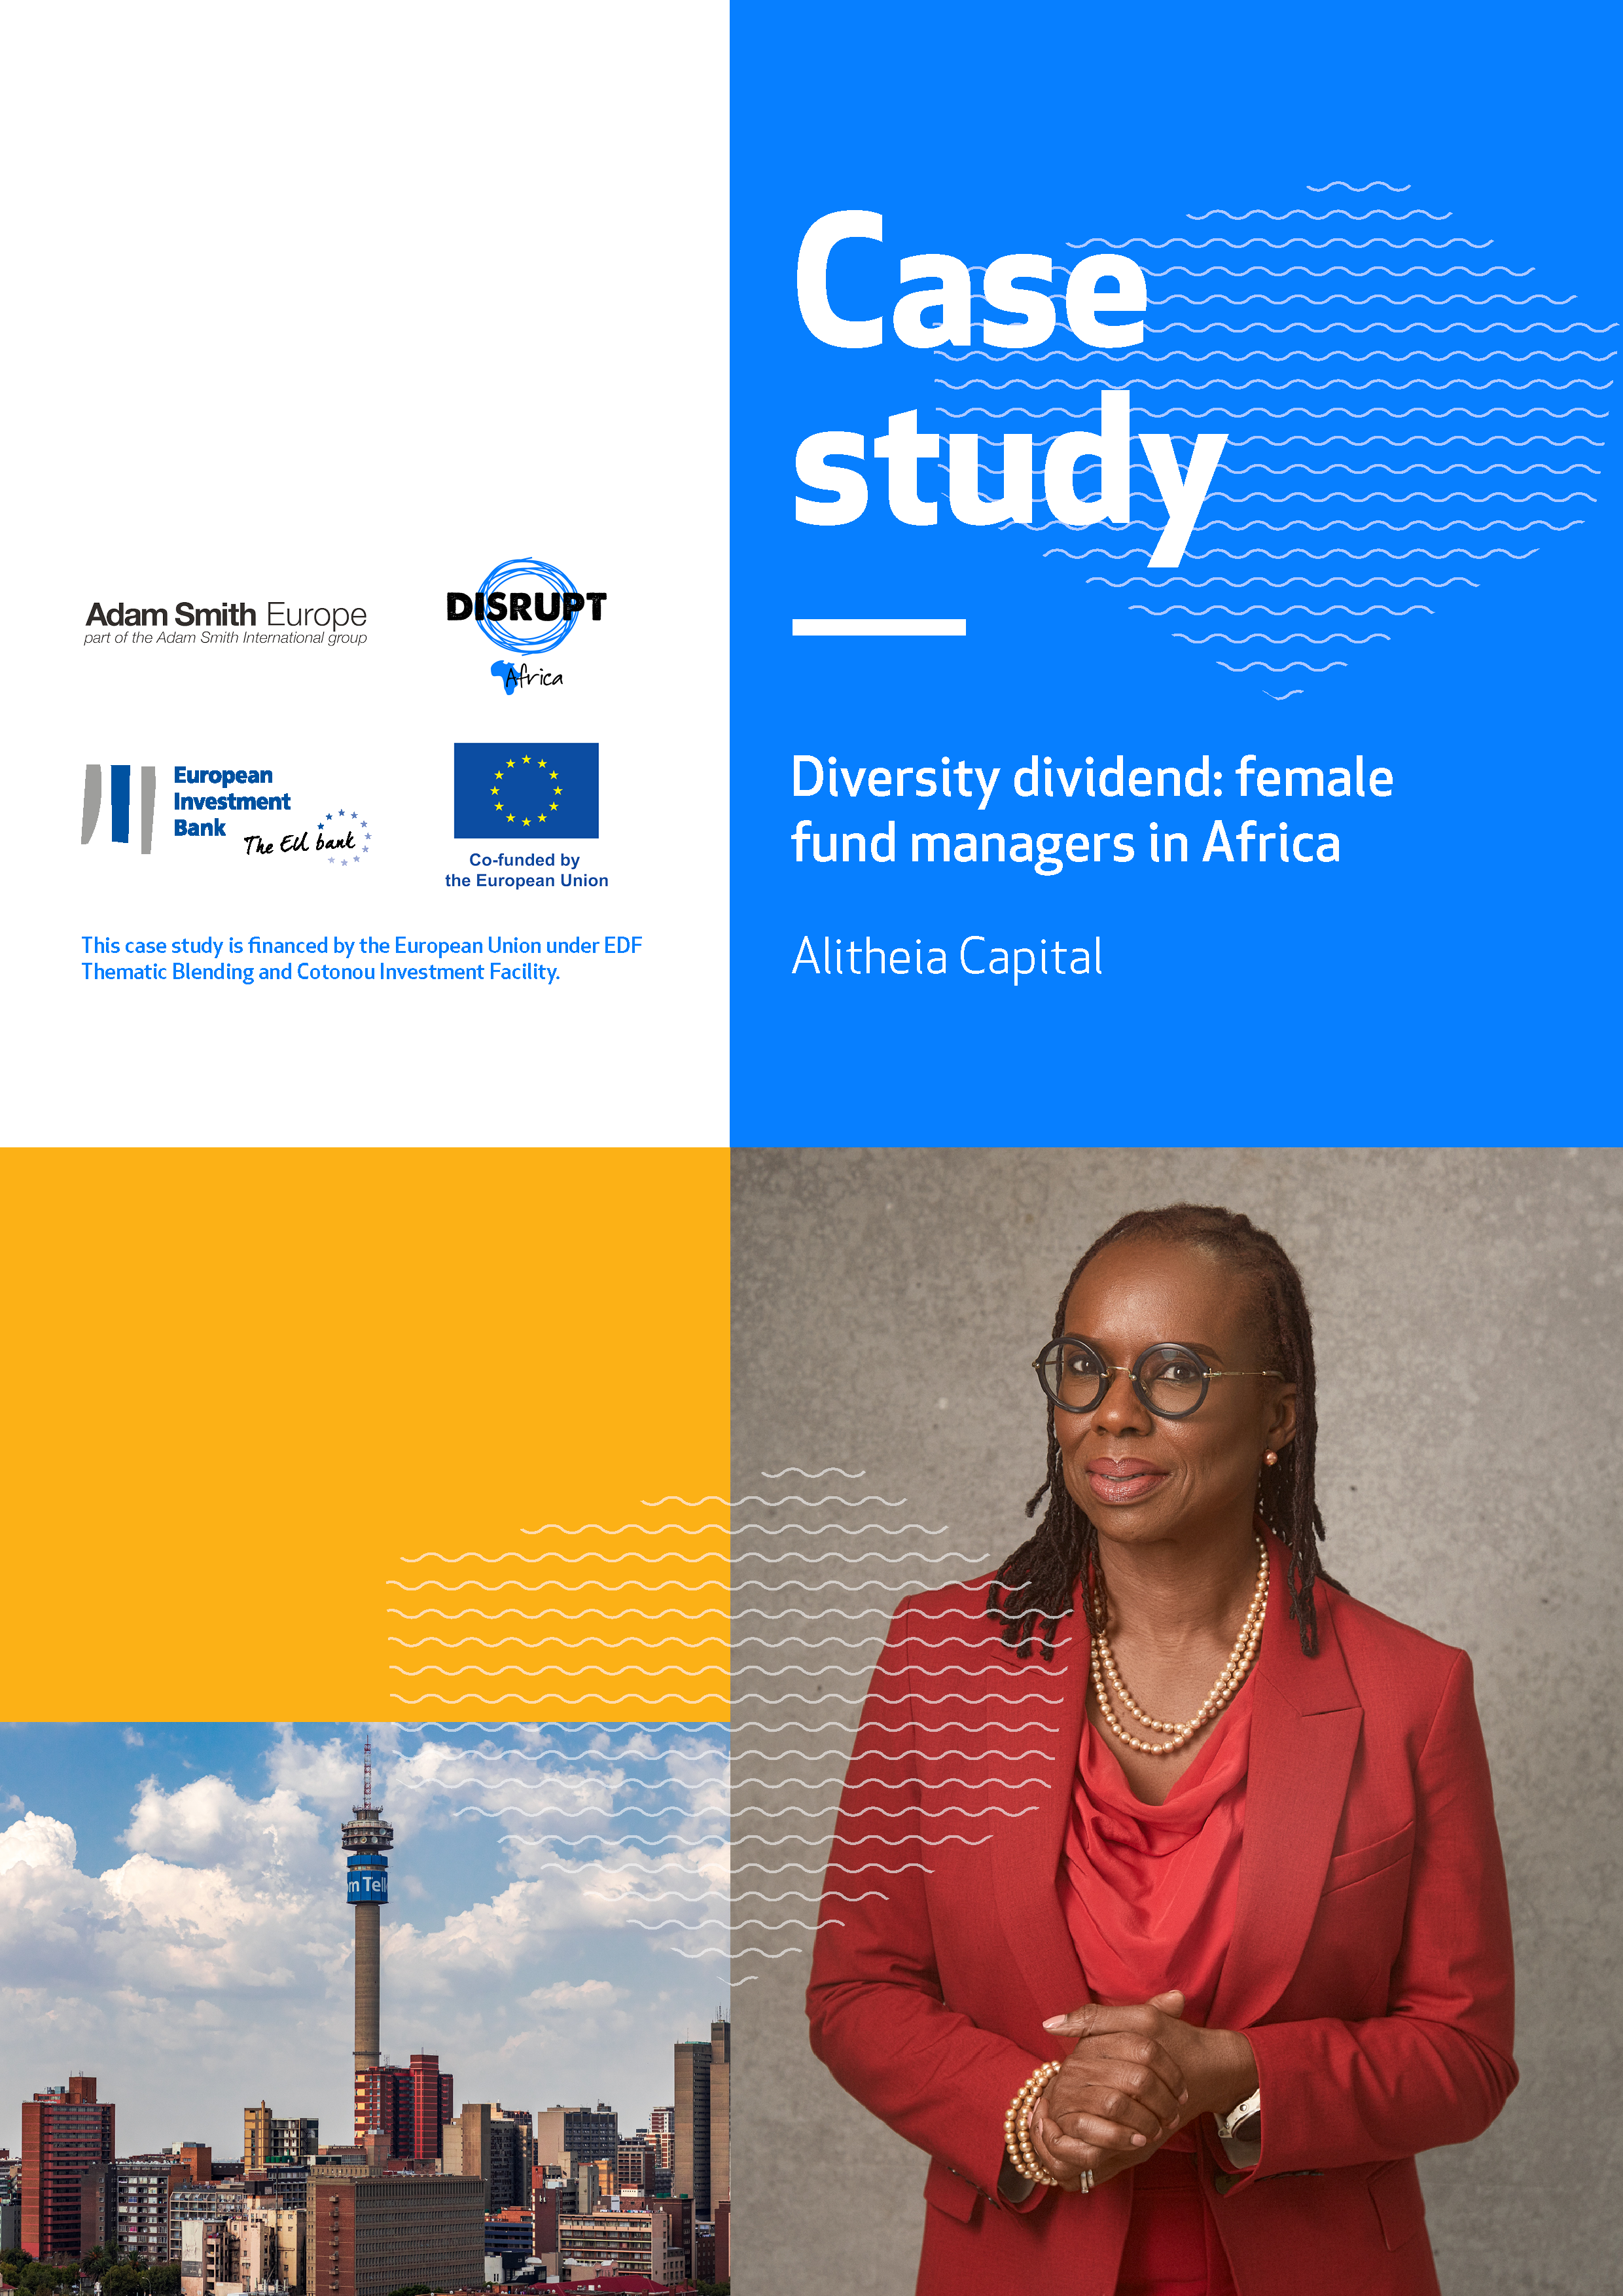 Diversity dividend: Female fund managers in Africa – Alitheia Capital